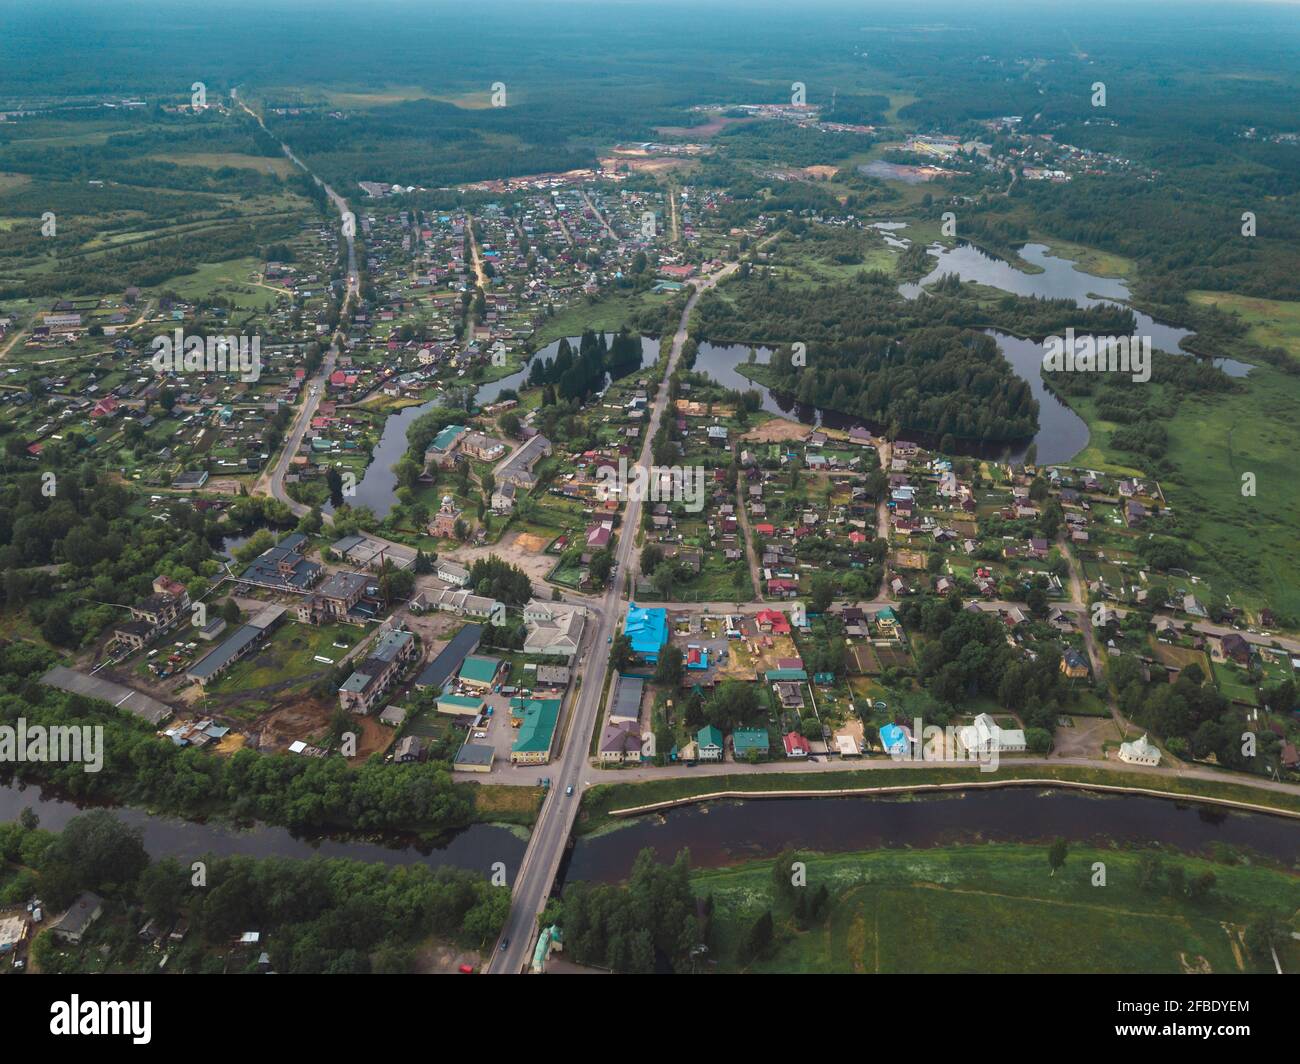 Aerial view of the town Tikhvin, Russia Stock Photo